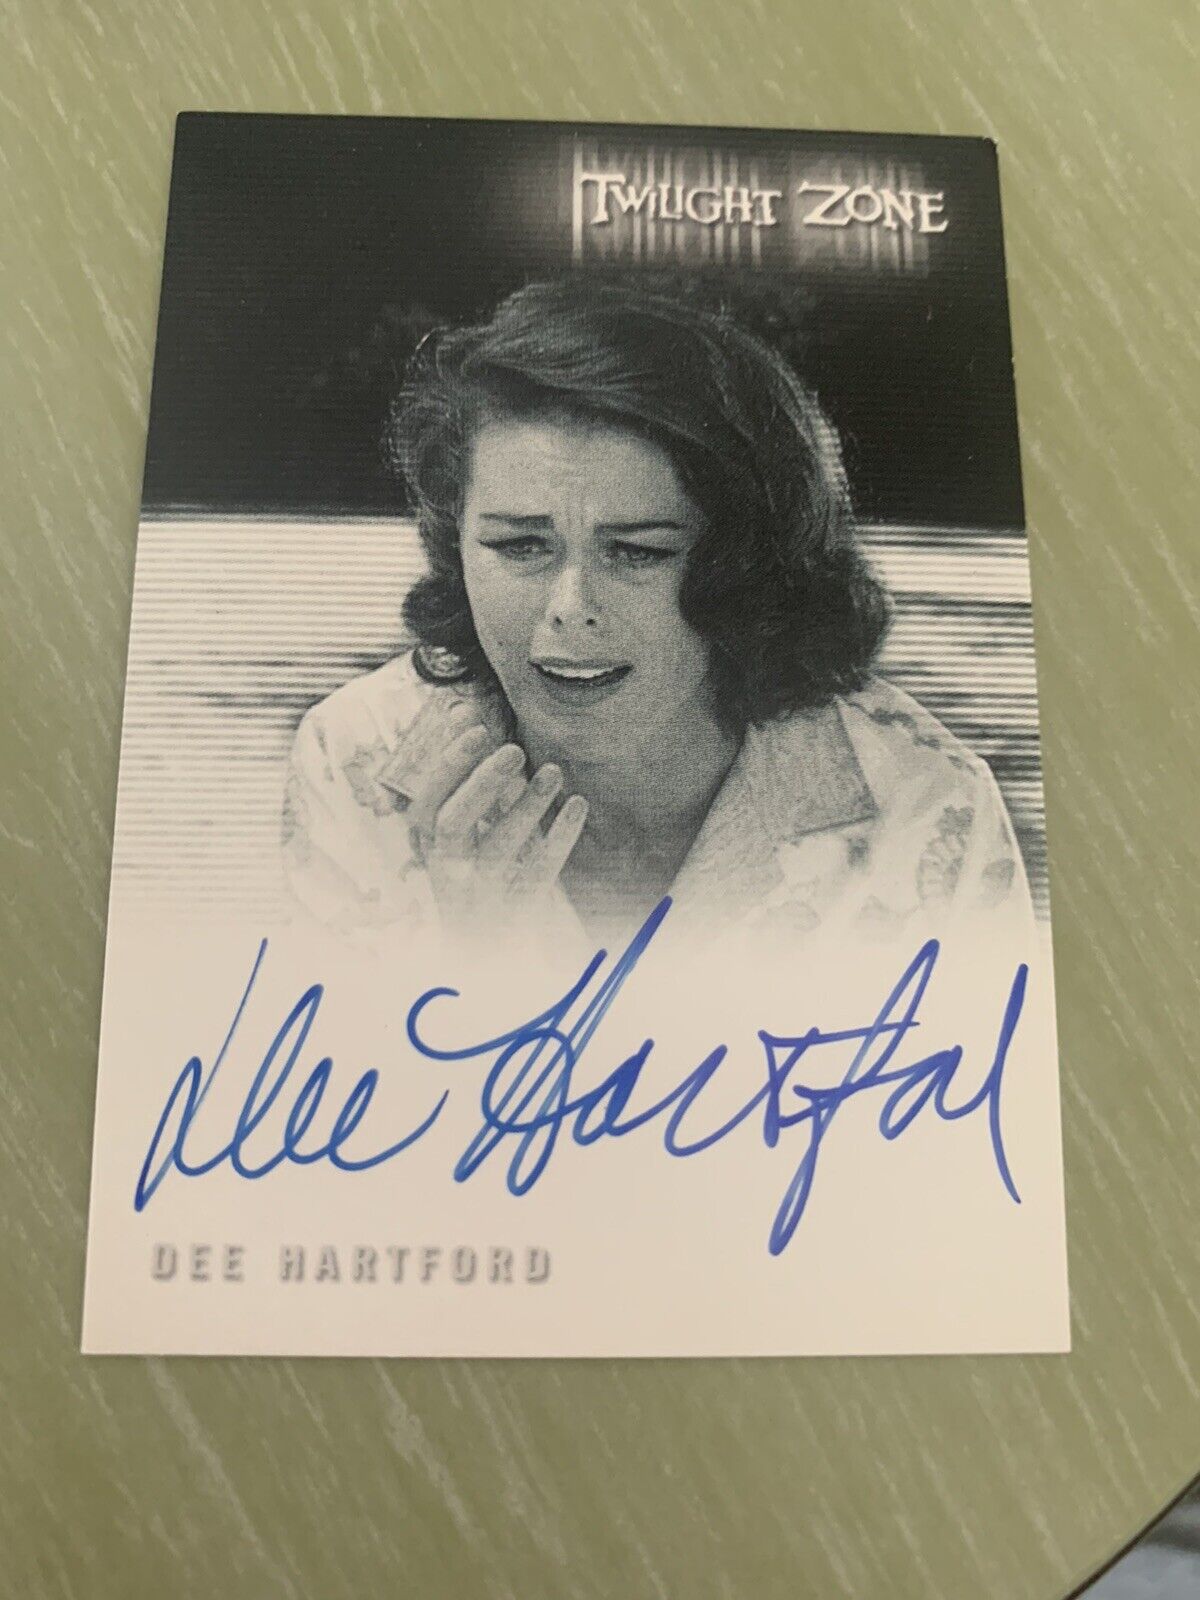 The Complete Twilight Zone 50th Anniversary Dee Hartford A106 autograph card